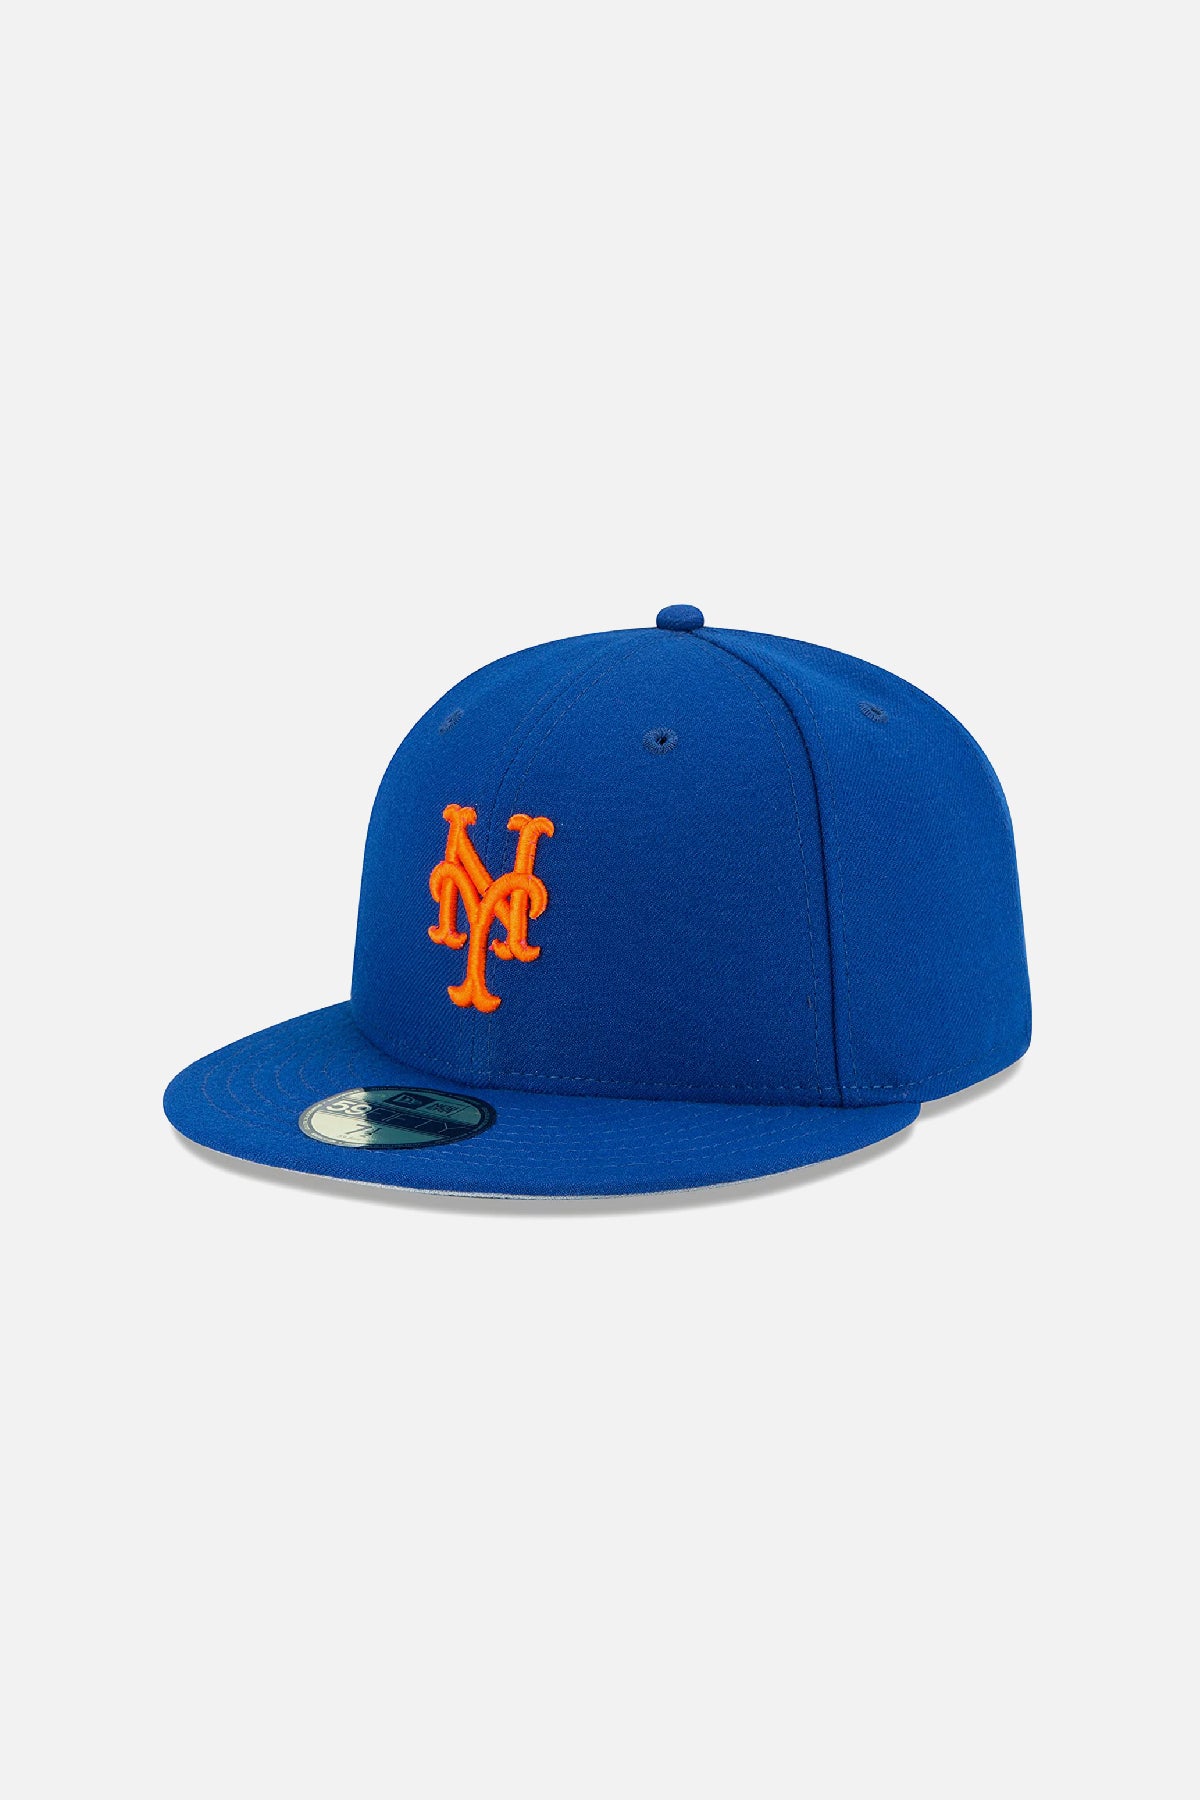 New Era New York Mets 59fifty Authentic Baseball hat 2000-2006 home All Royal